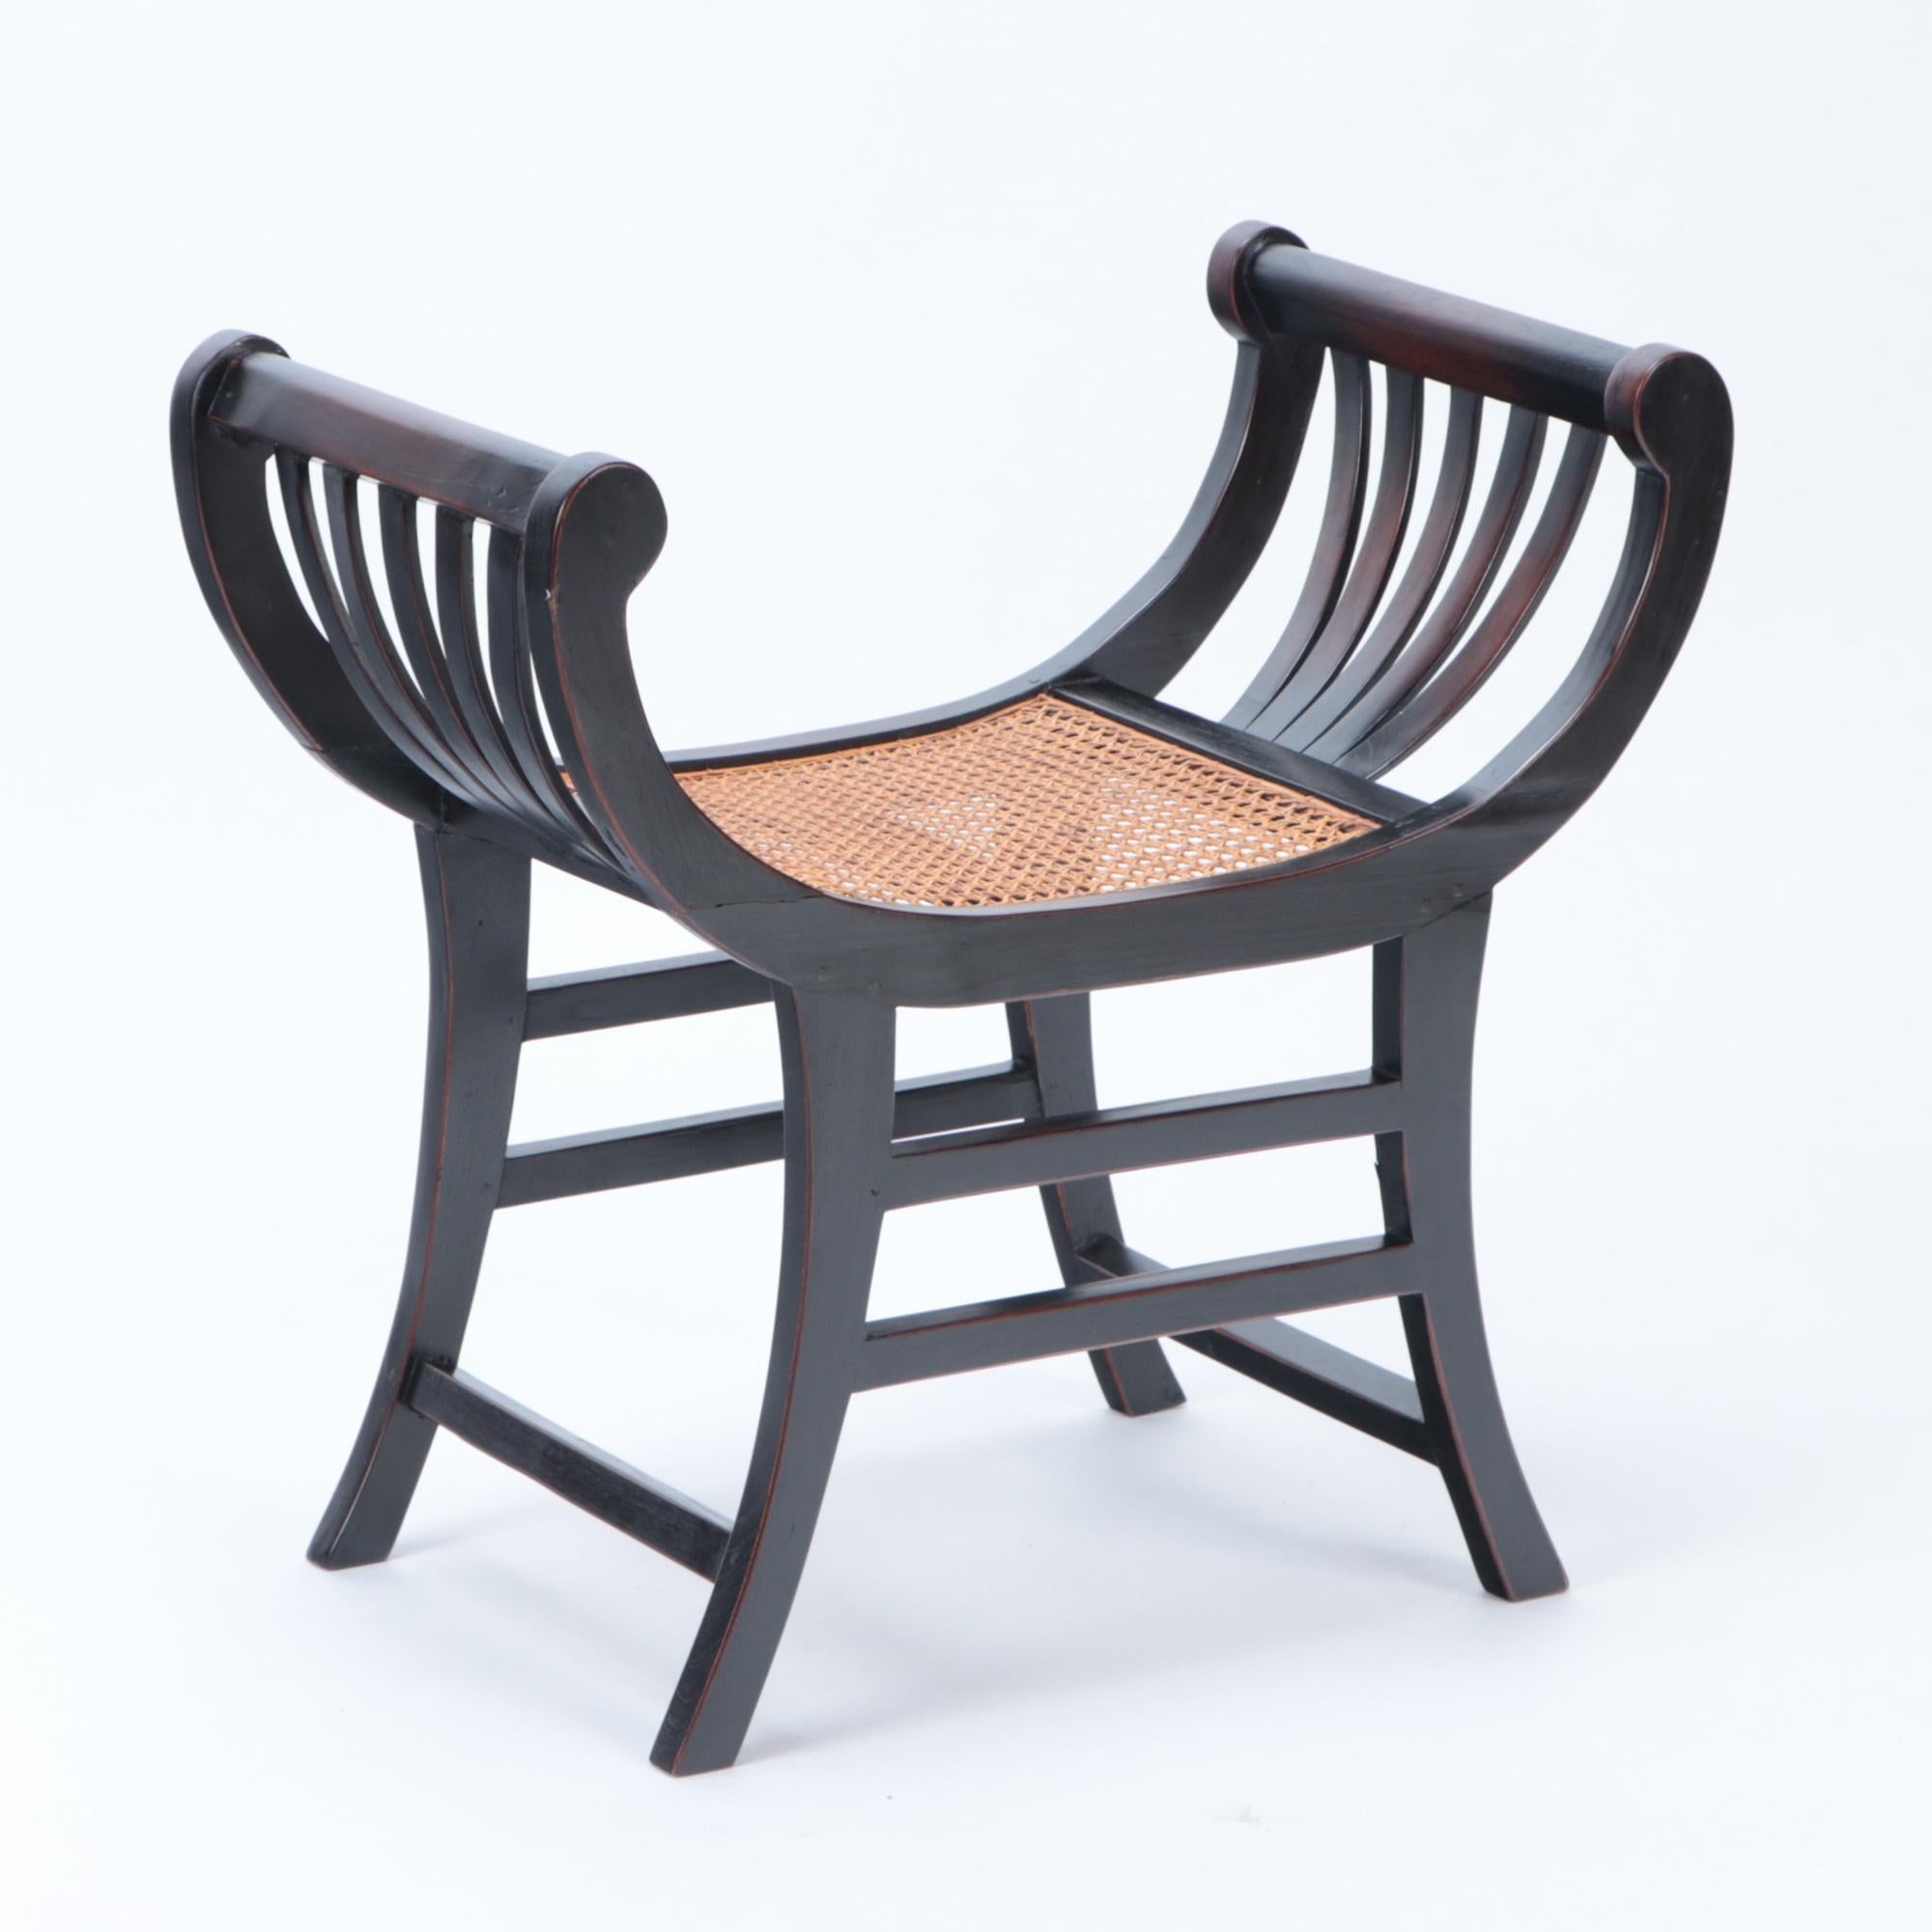 A Pair of Black Teak Rattan Curved Sartika Stools Benches. Contemporary.